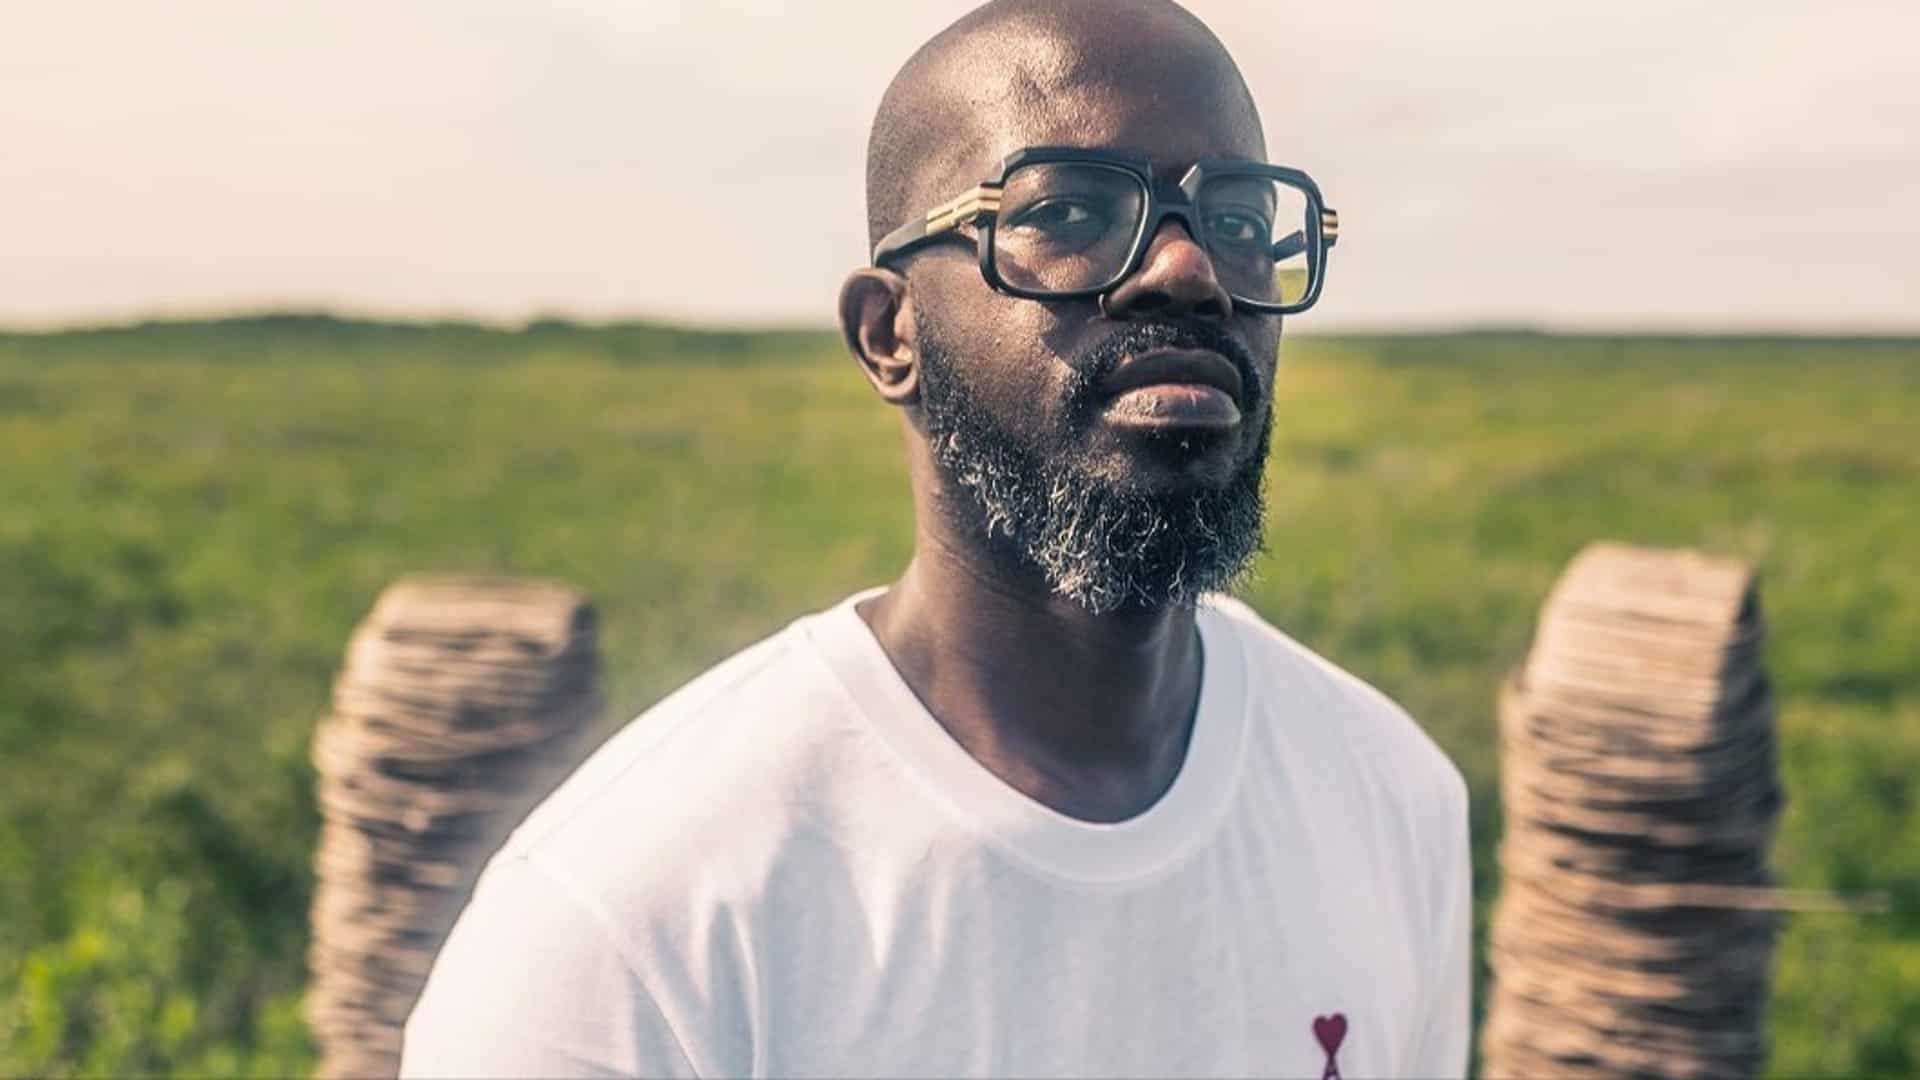 Black Coffee designs a masterful remix for THEMBA’s ‘Reflections’: Listen